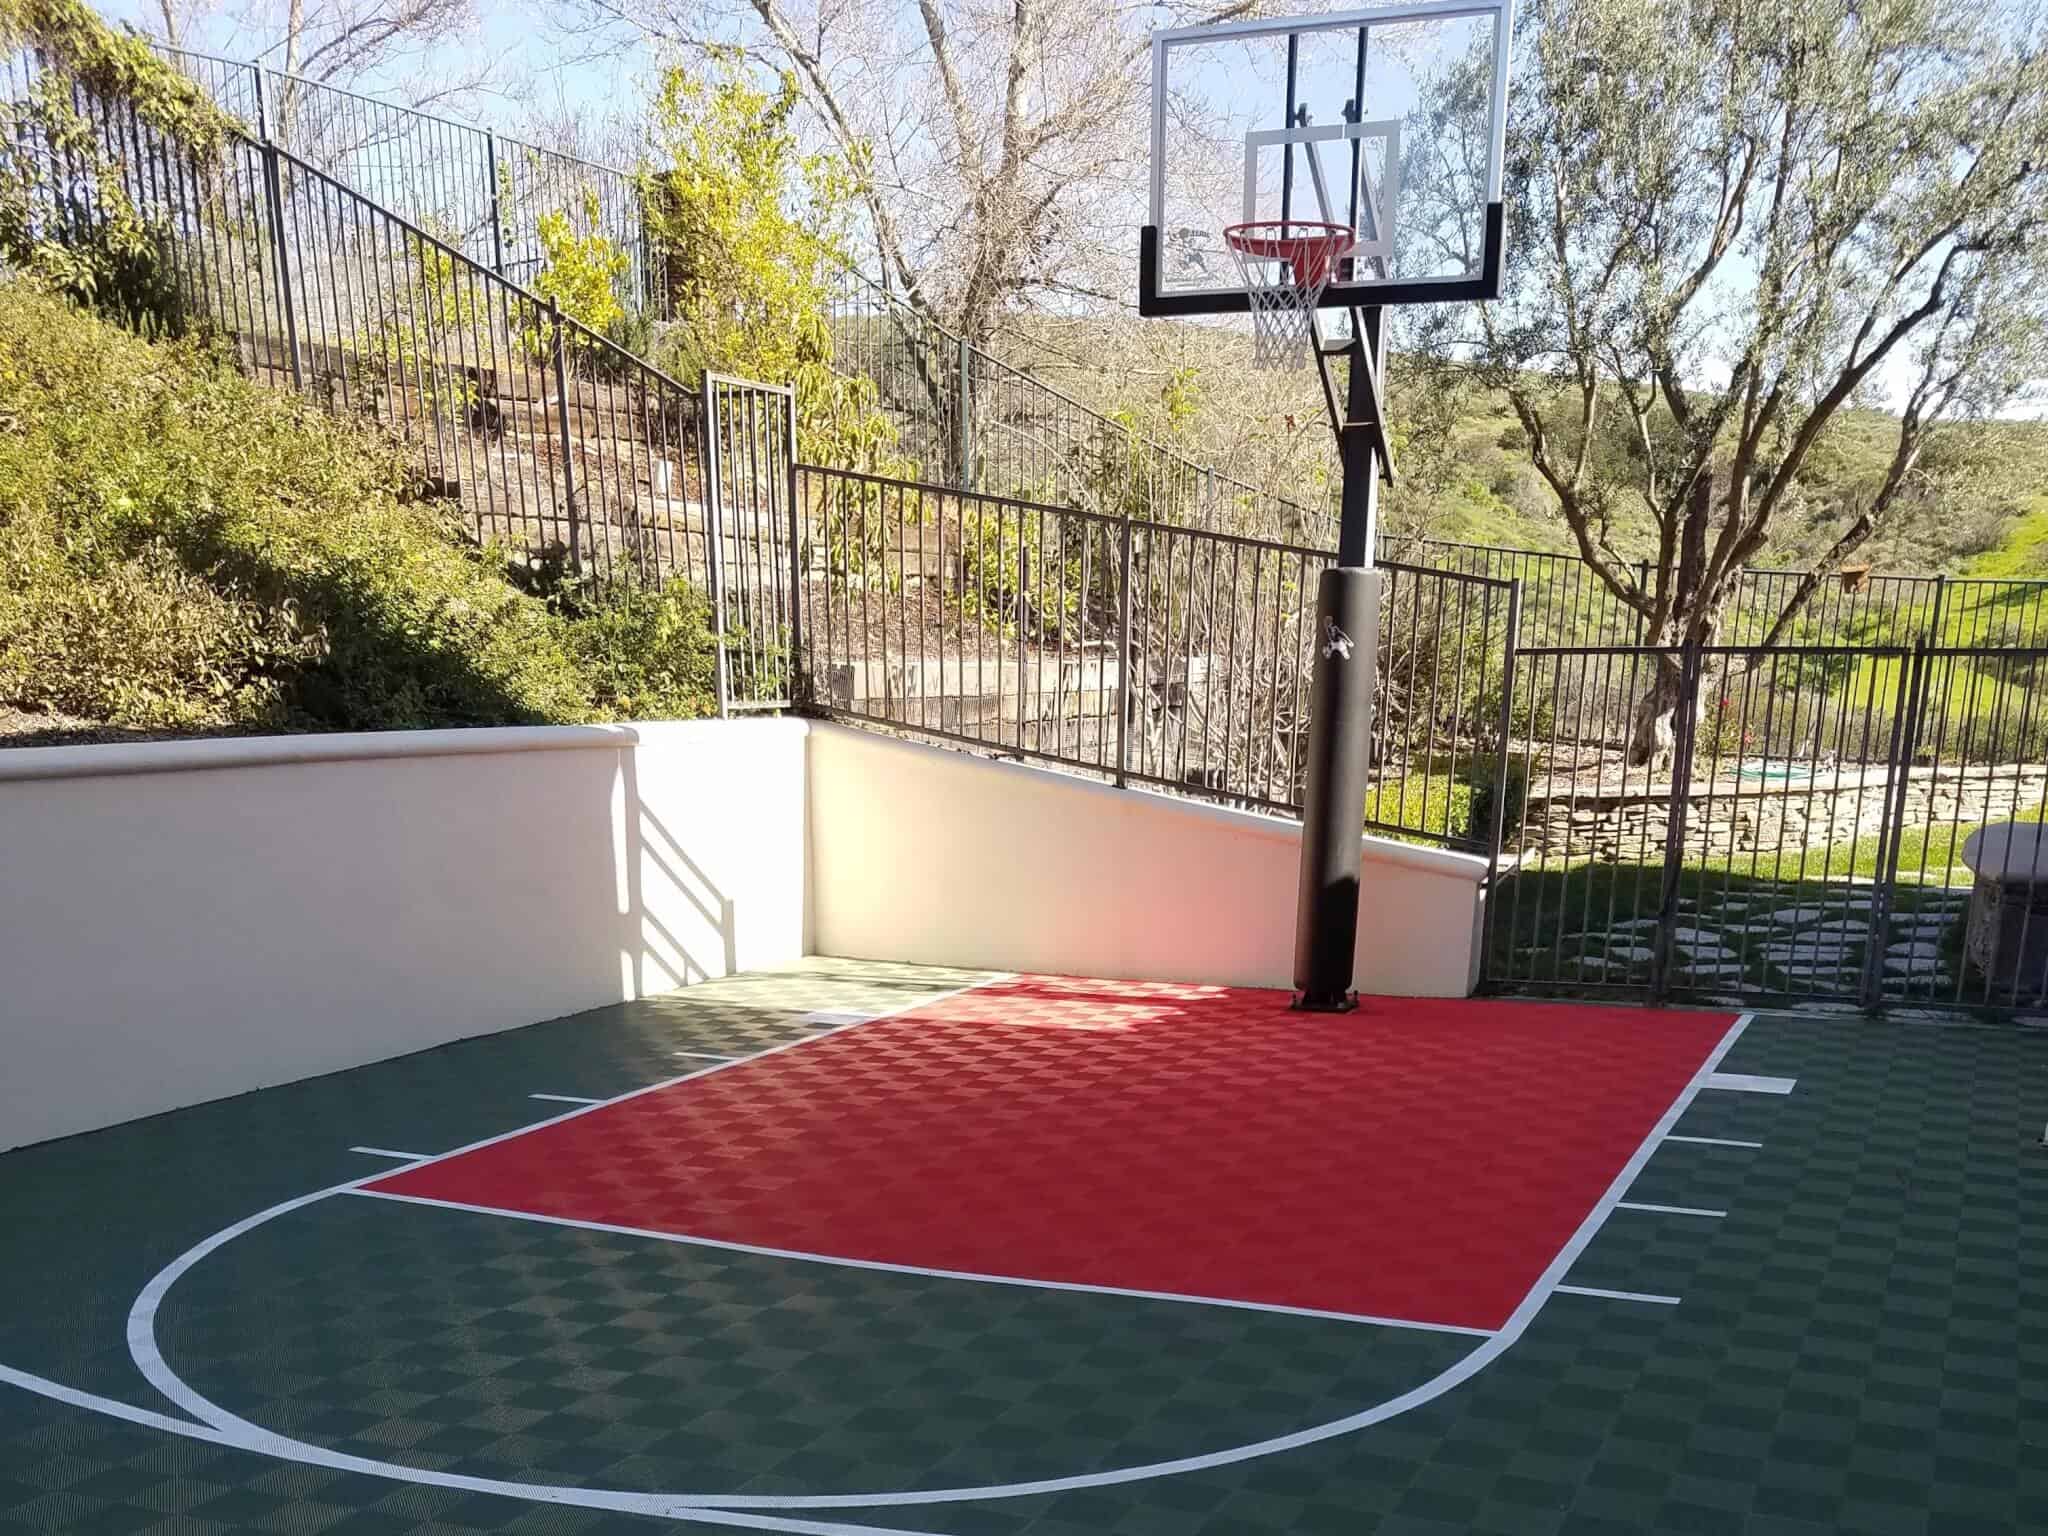 Pros and Cons of a Tiled Outdoor Basketball Court